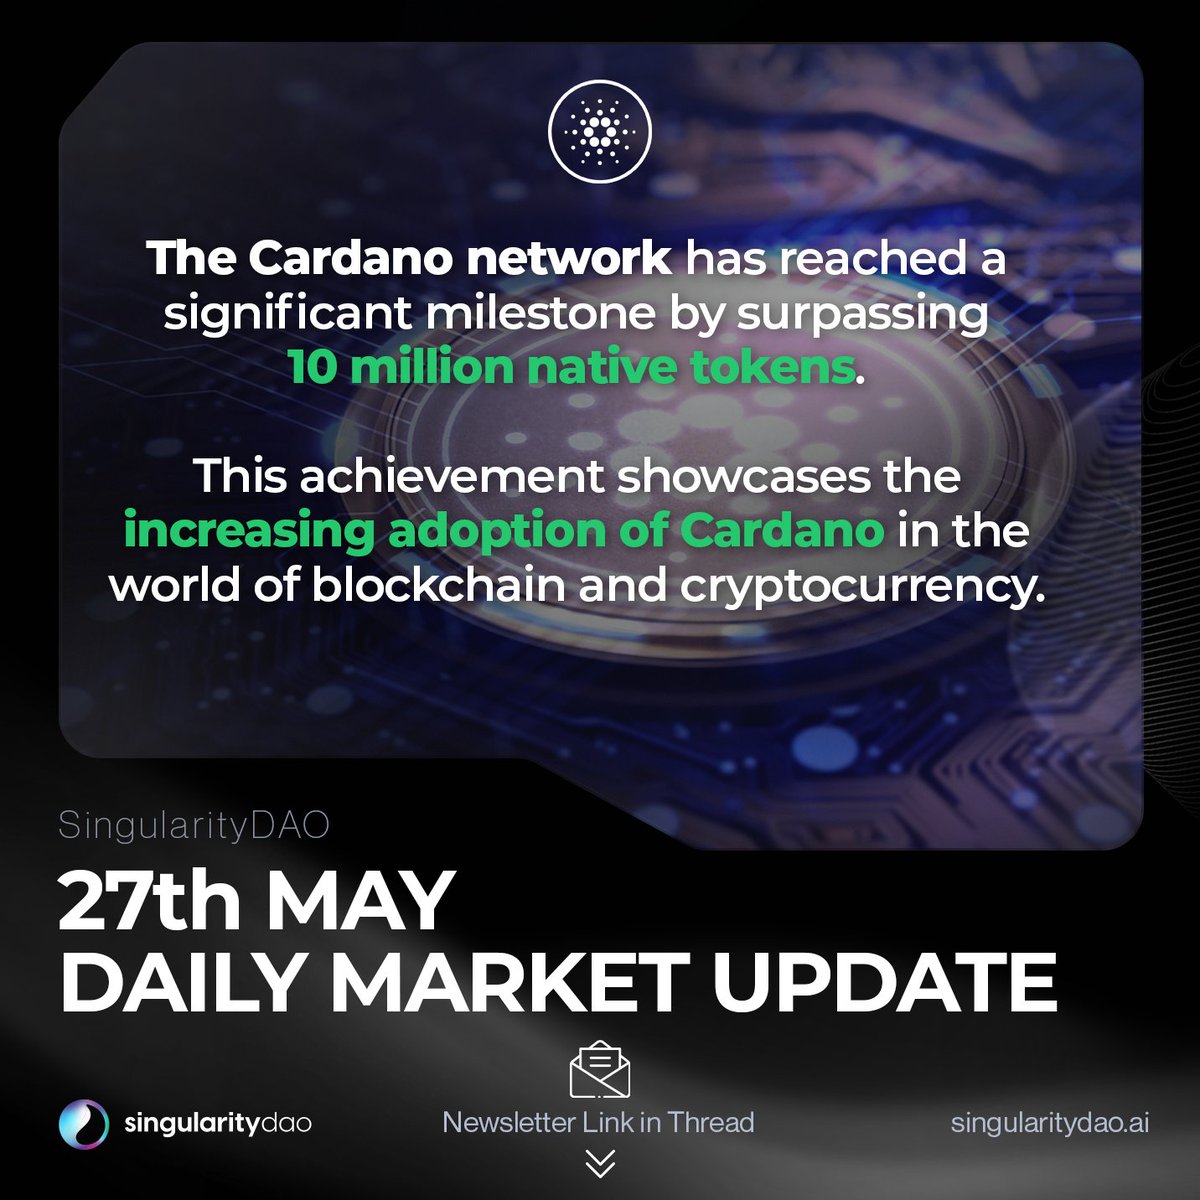 Daily Market Update - May 27th The Cardano network has reached a significant milestone by surpassing 10 million native tokens